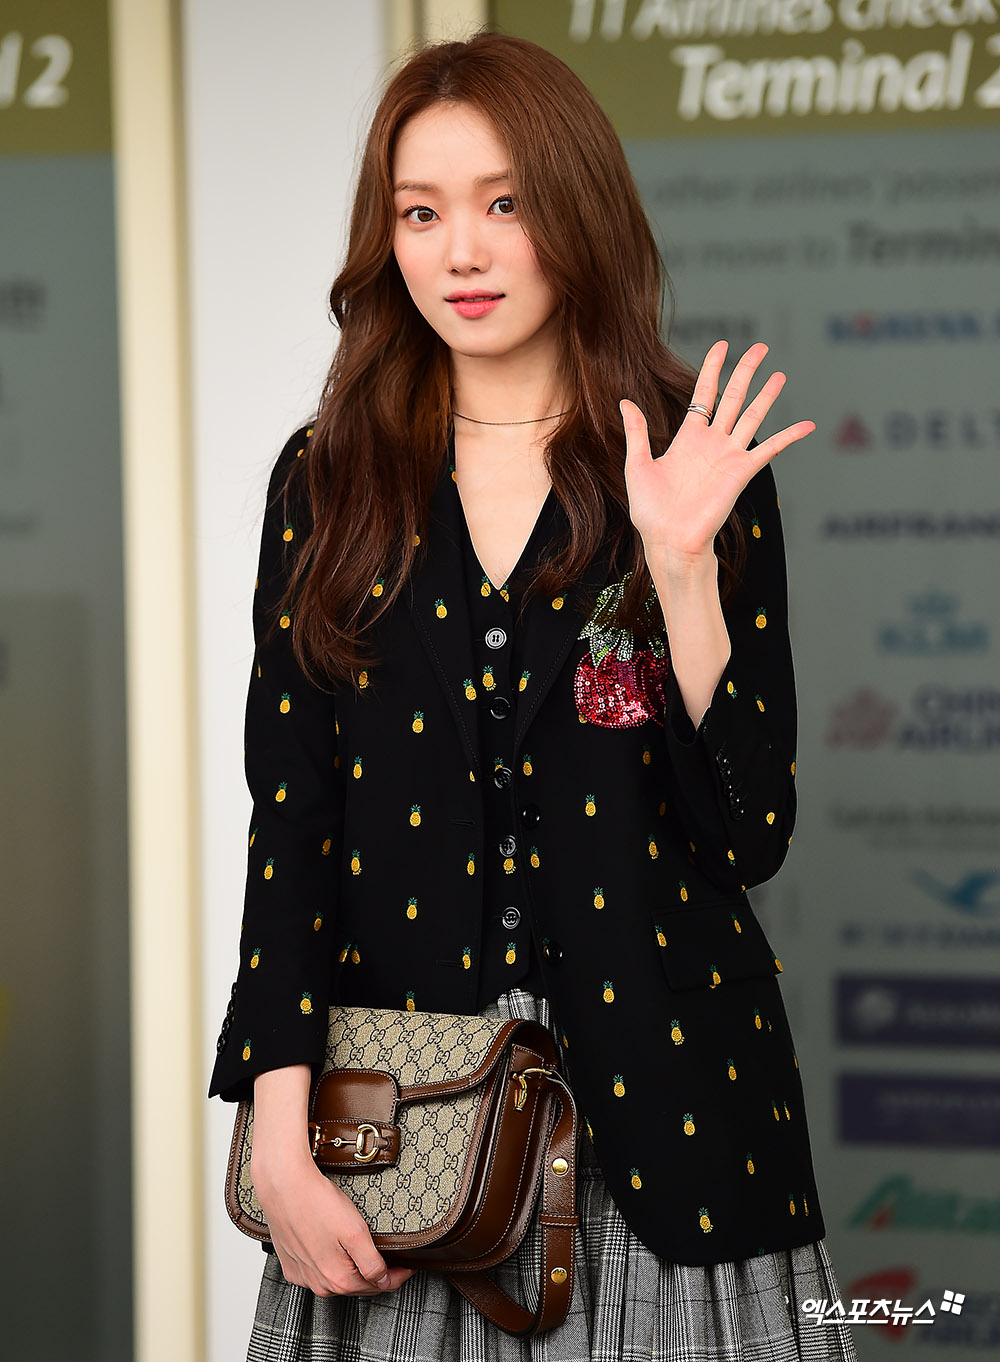 Actor Lee Sung-kyung is leaving for Italy Milan via the Incheon International Airport on Tuesday afternoon to attend the Fashion show.